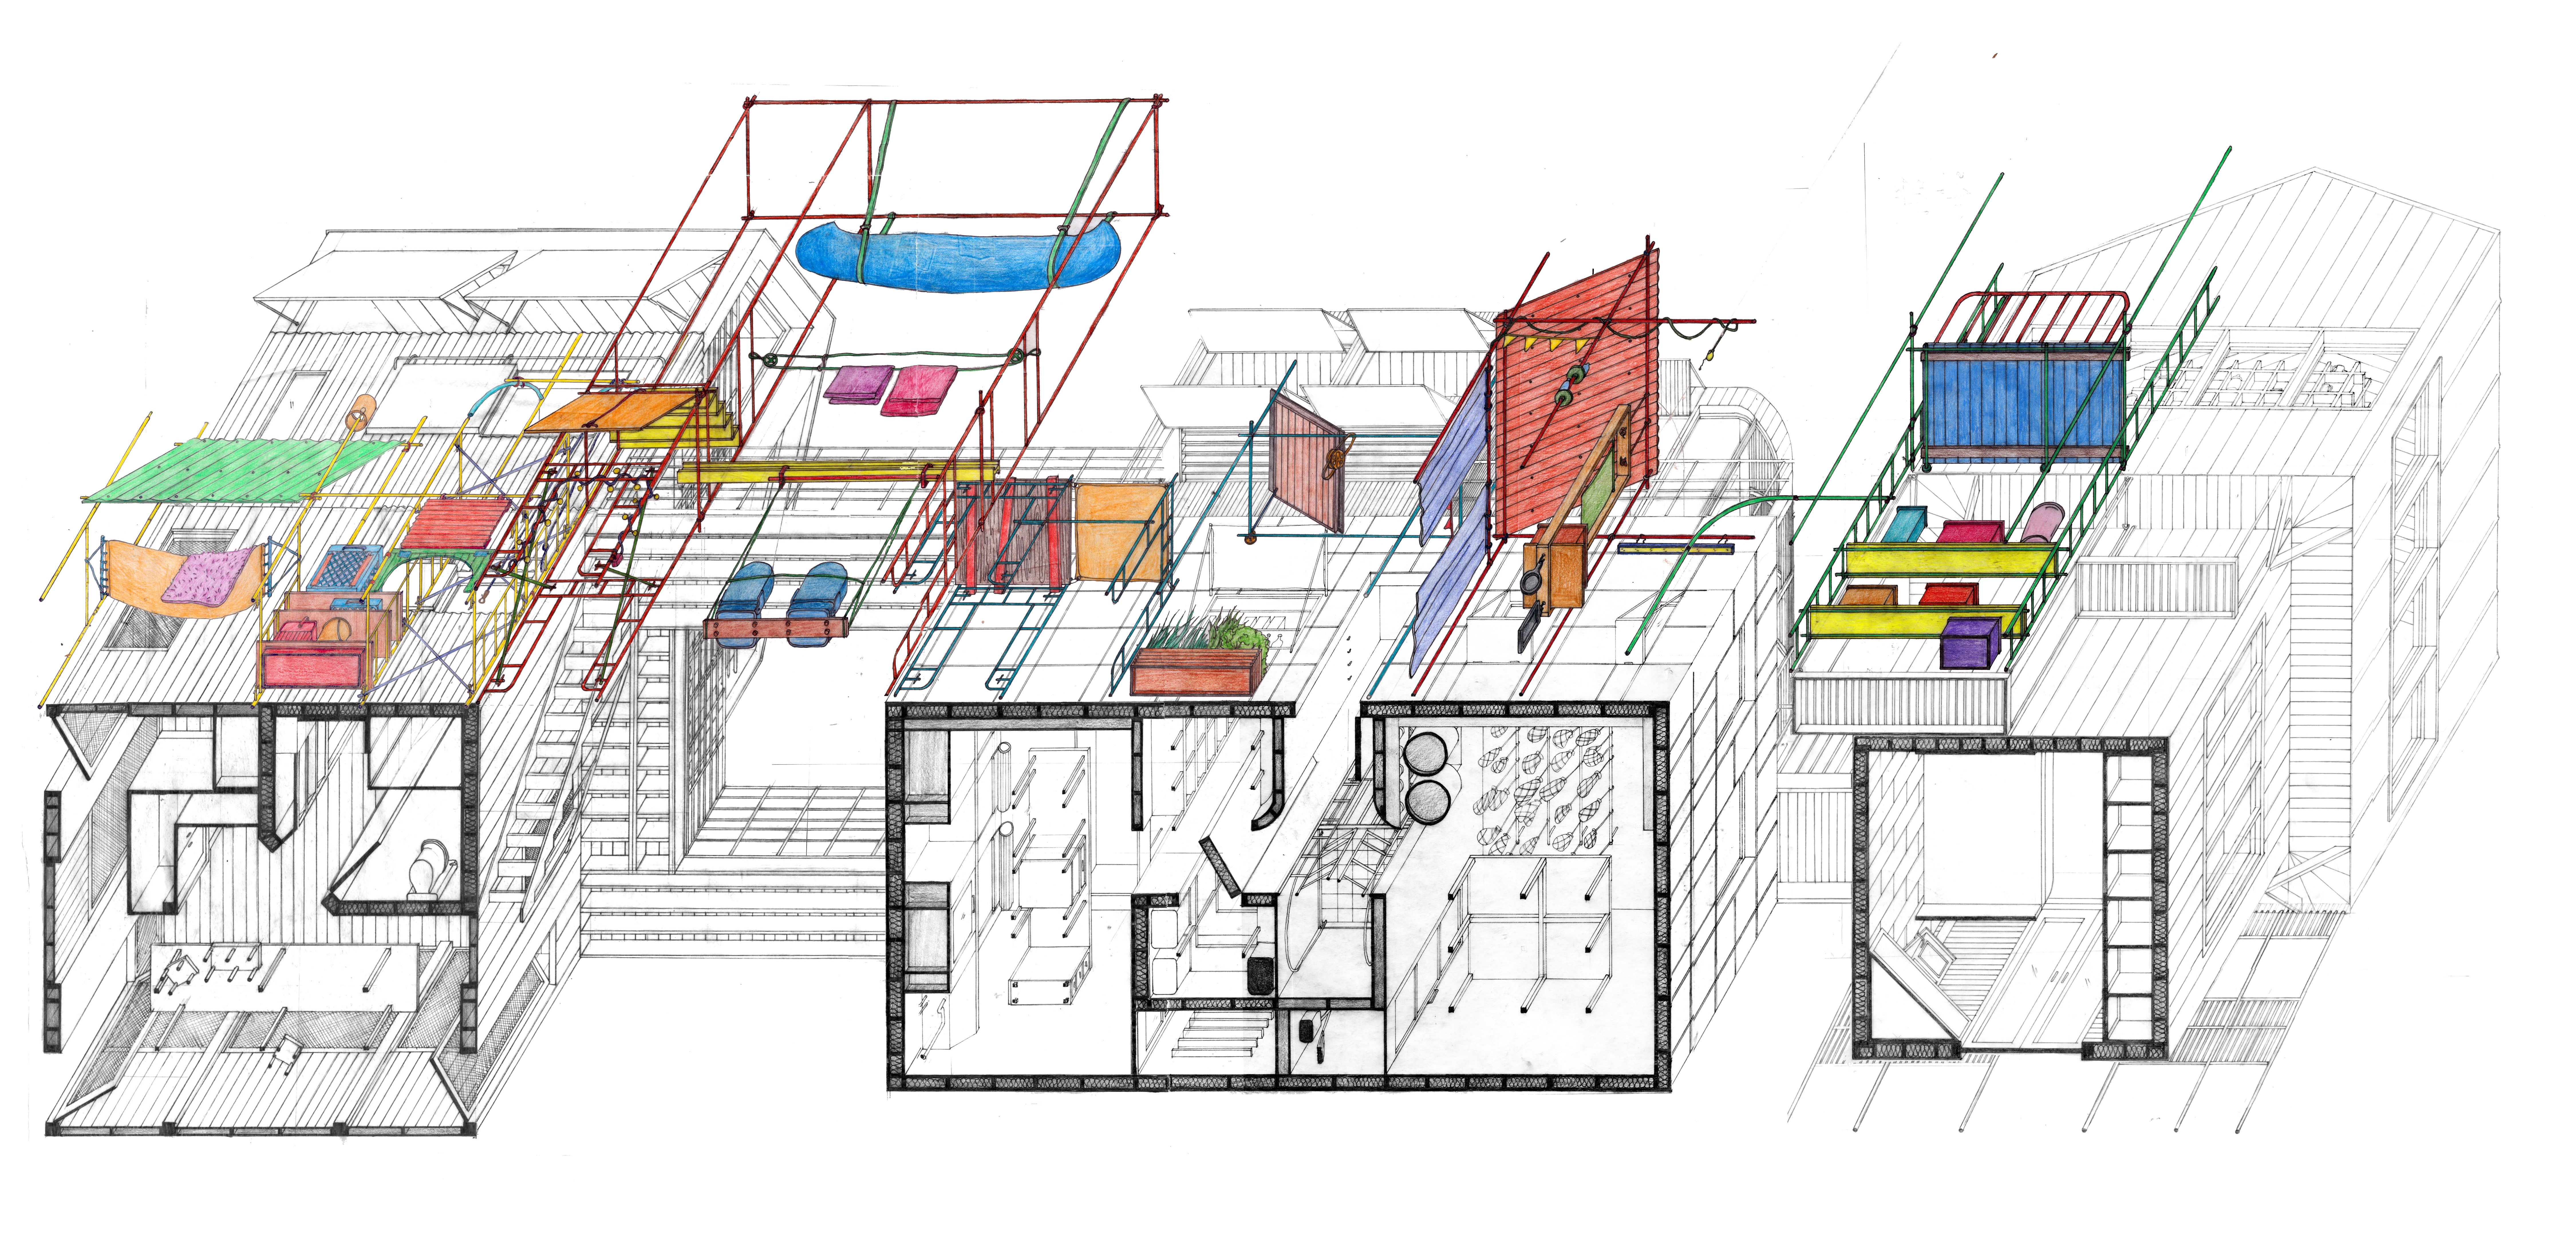 Colourful images of scaffolding and DIY structures scabbed onto the original black and white drawing of a complex of spaces.